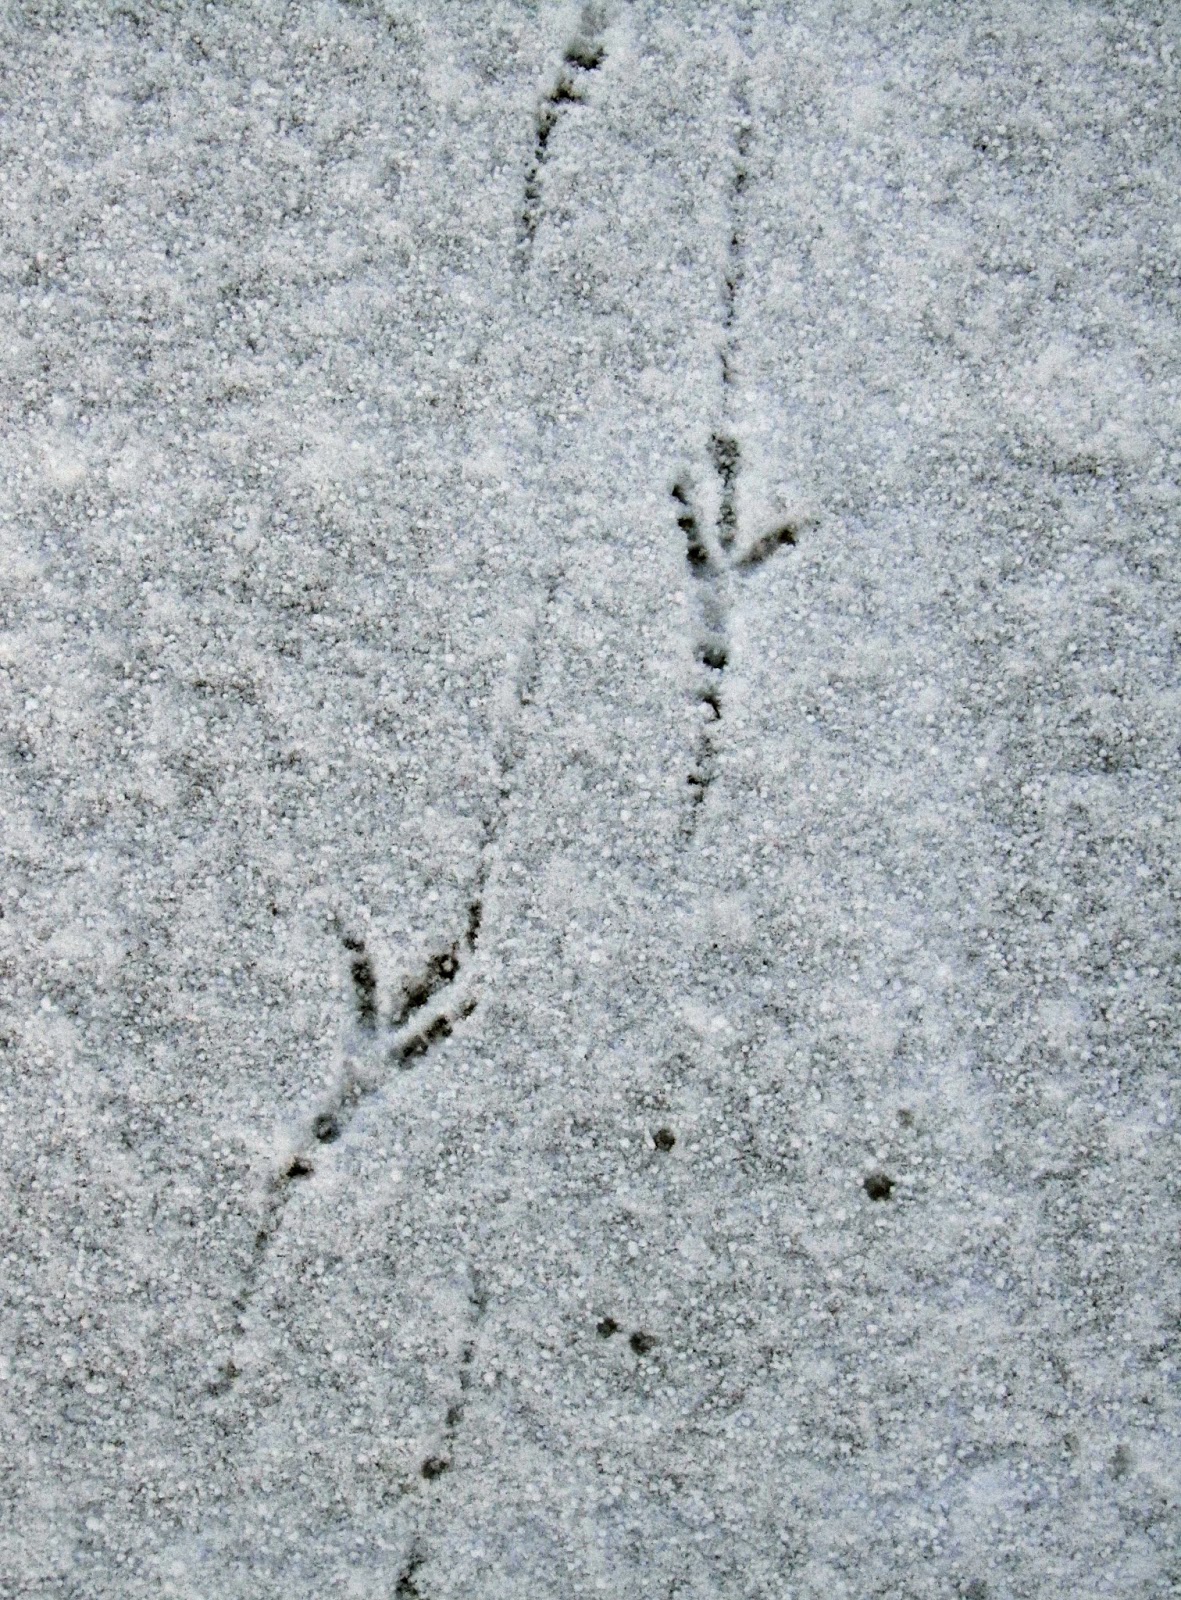 bird's steps in the snow